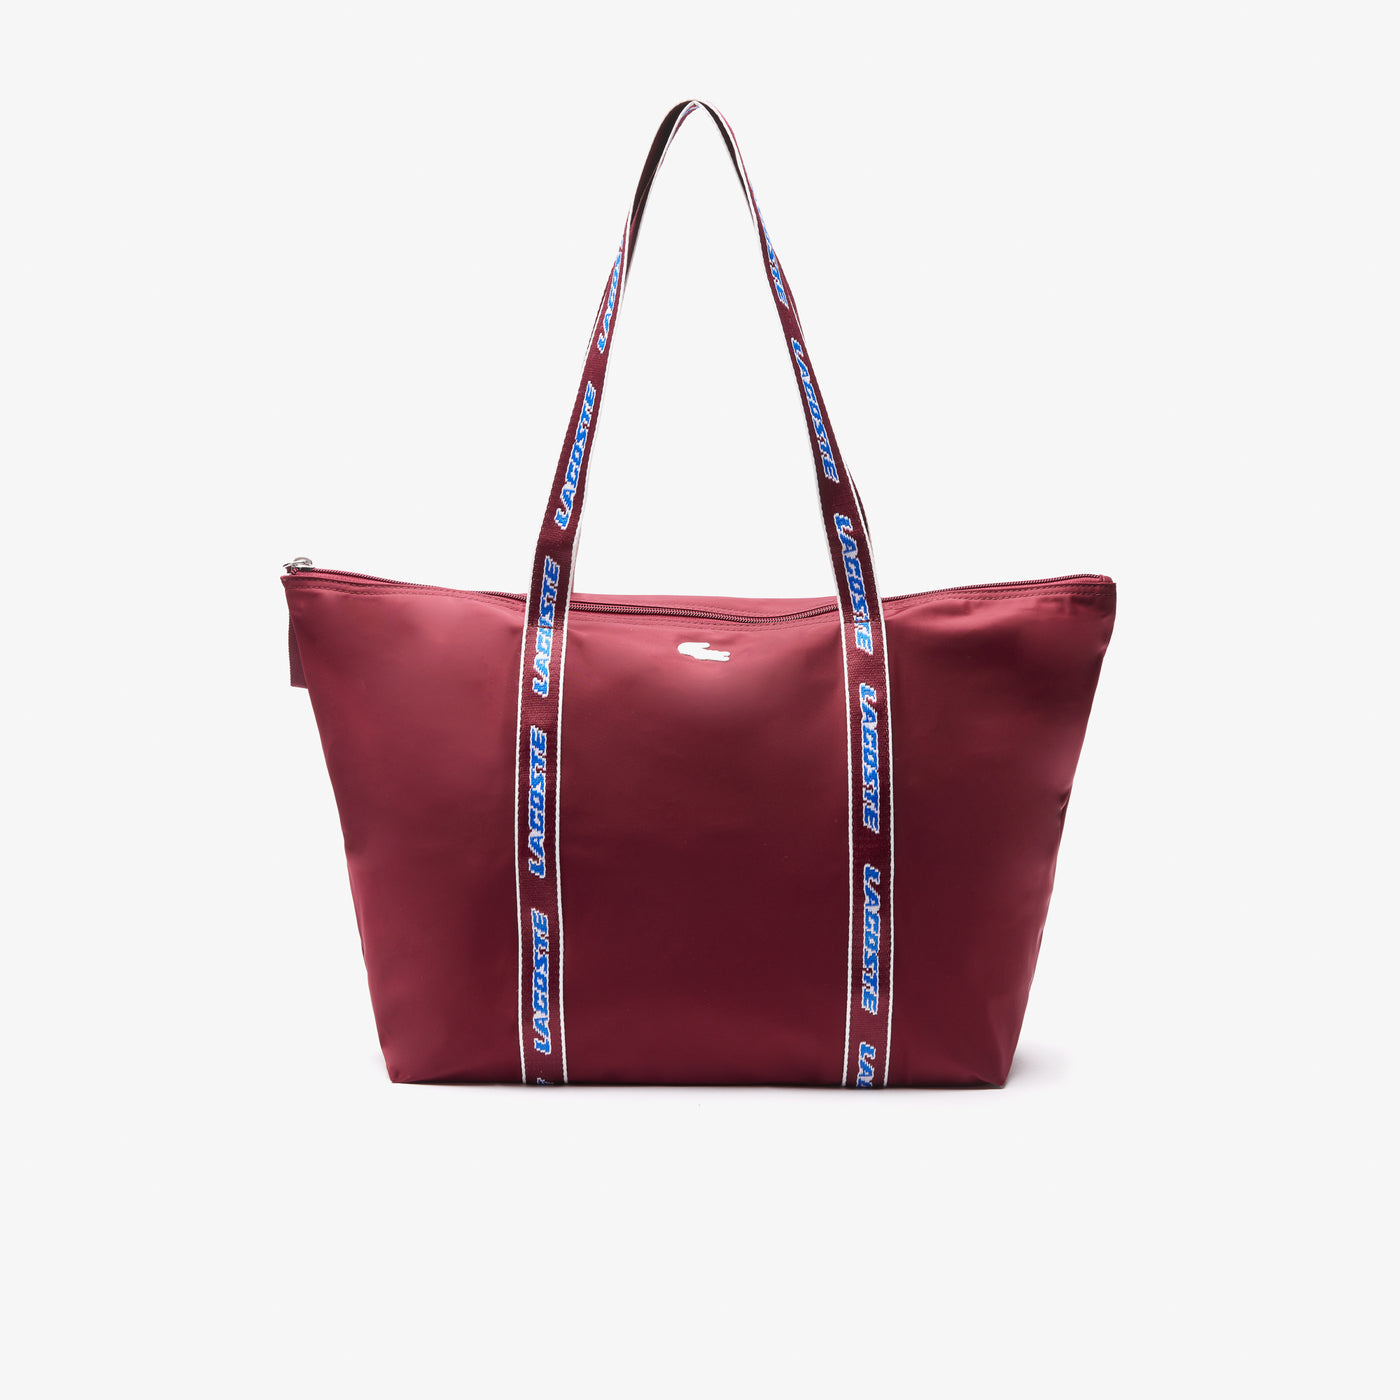 Shop The Latest Collection Of Lacoste Women'S Lacoste Colour-Block Branded Handle Shopping Bag - Nf3975Va In Lebanon